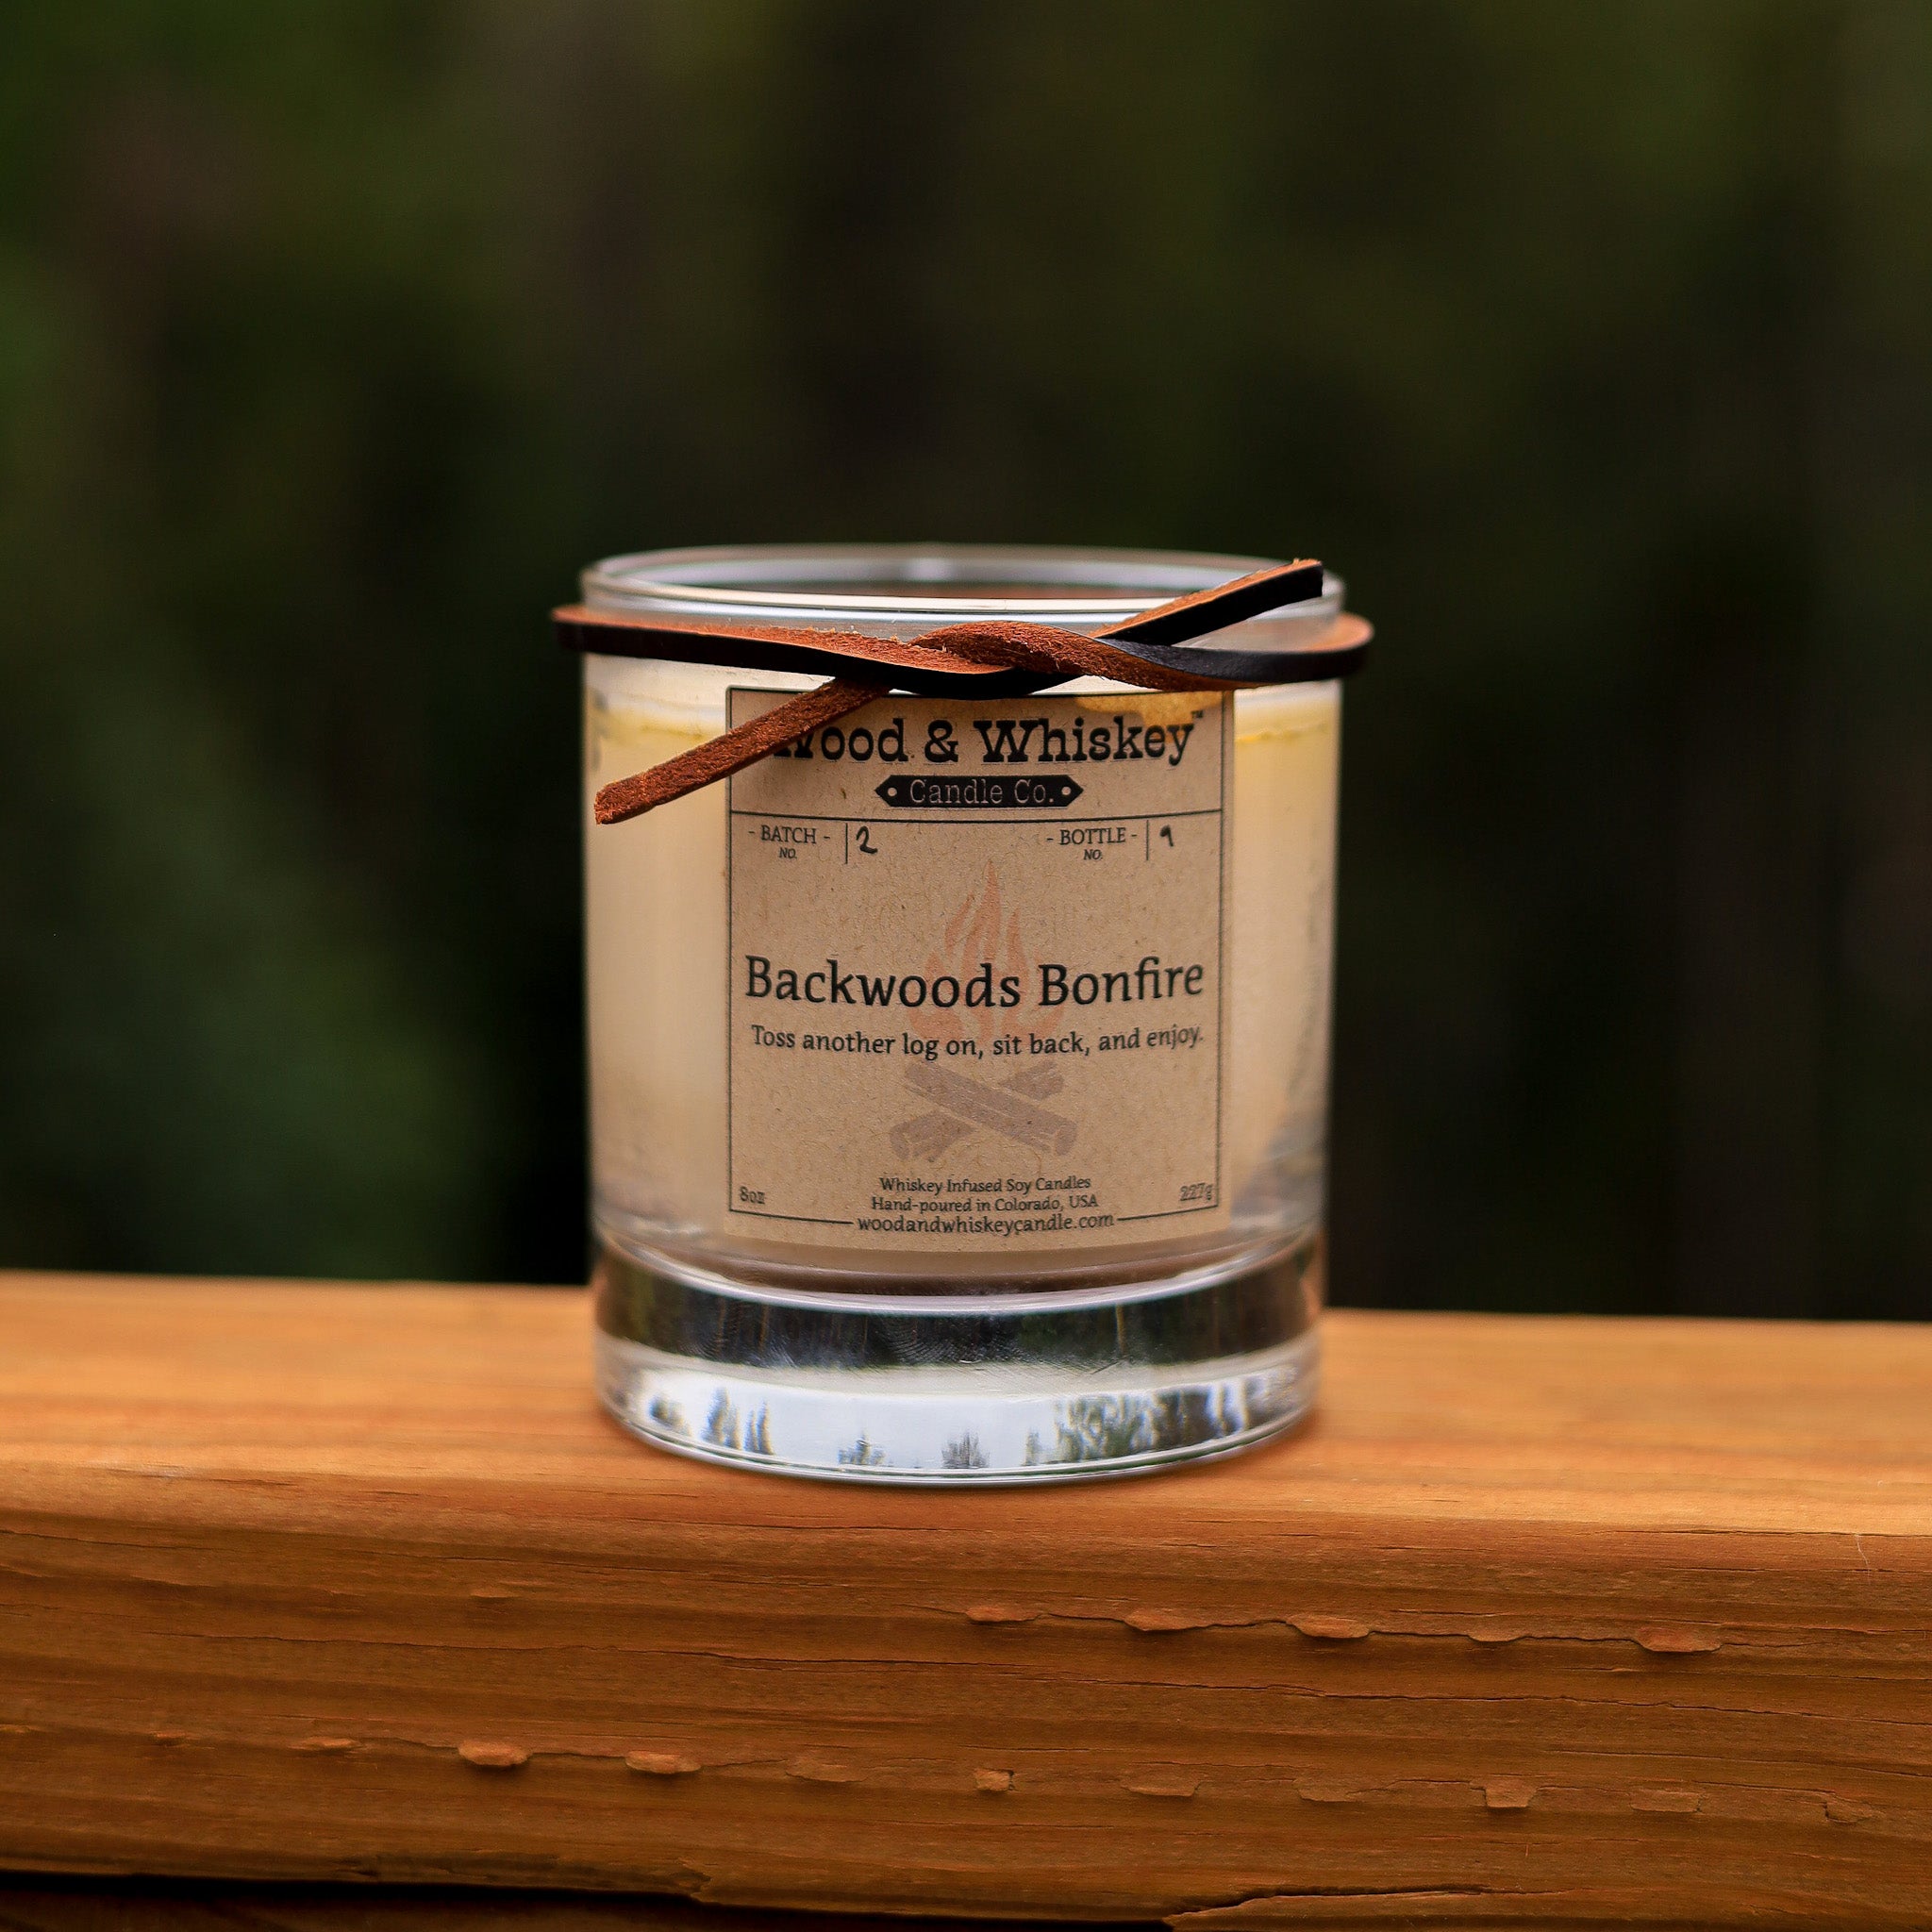 Backwoods Bonfire | 8 oz Whiskey Infused Cocktail Glass Candle